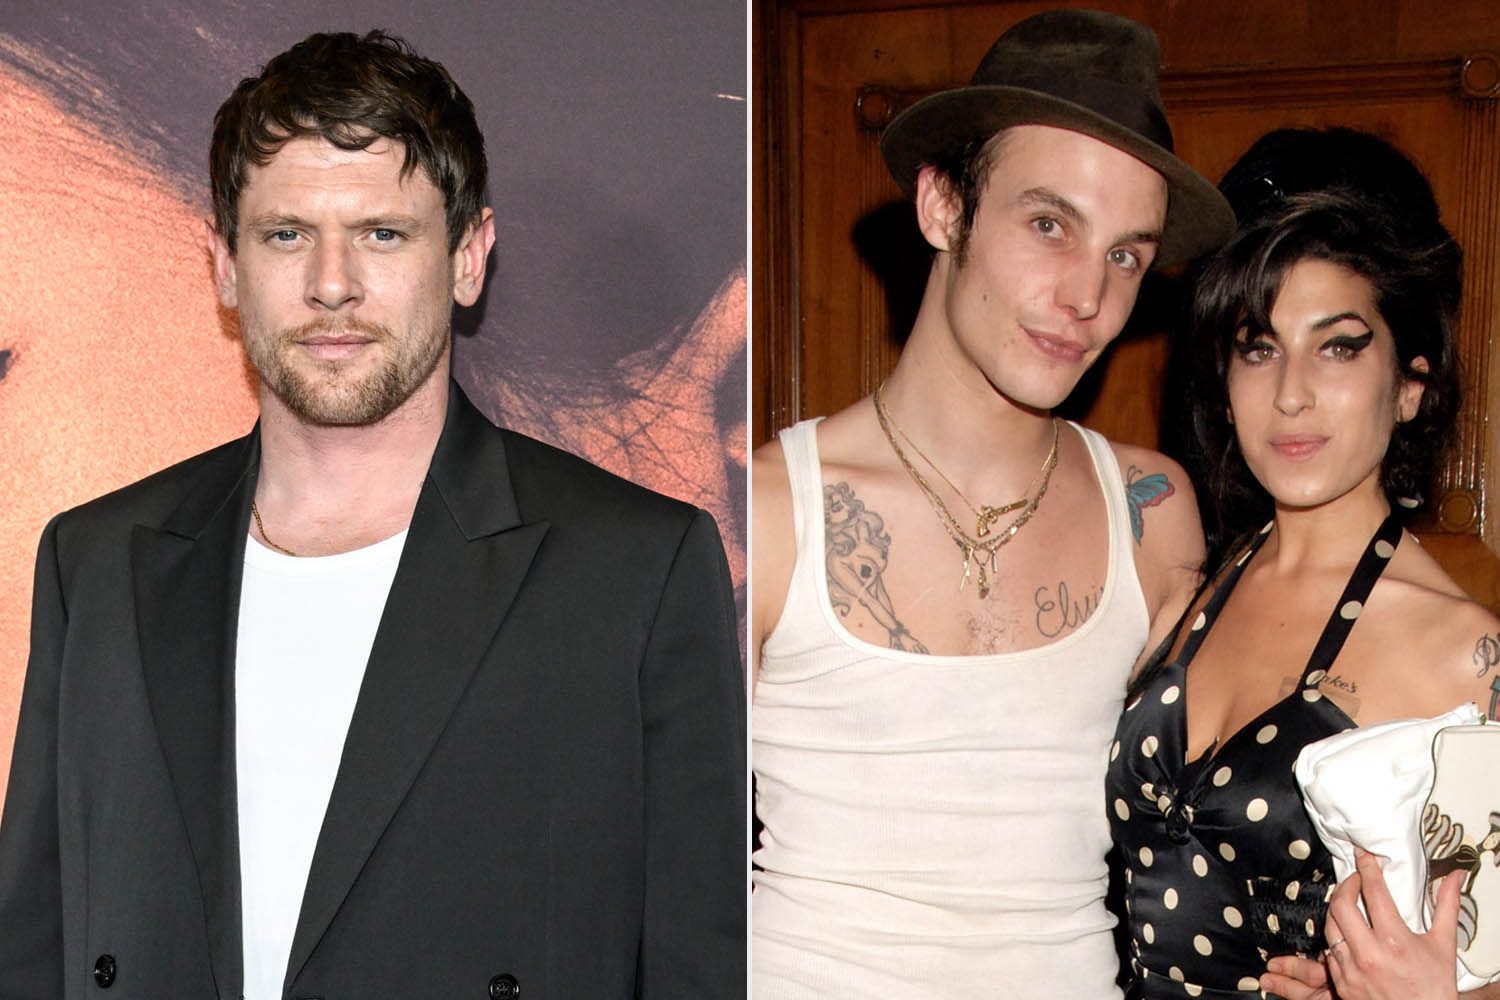 Amy Winehouse's Ex-Husband Is 'Very Misunderstood,' Says “Back to Black” Star Jack O'Connell (Exclusive)